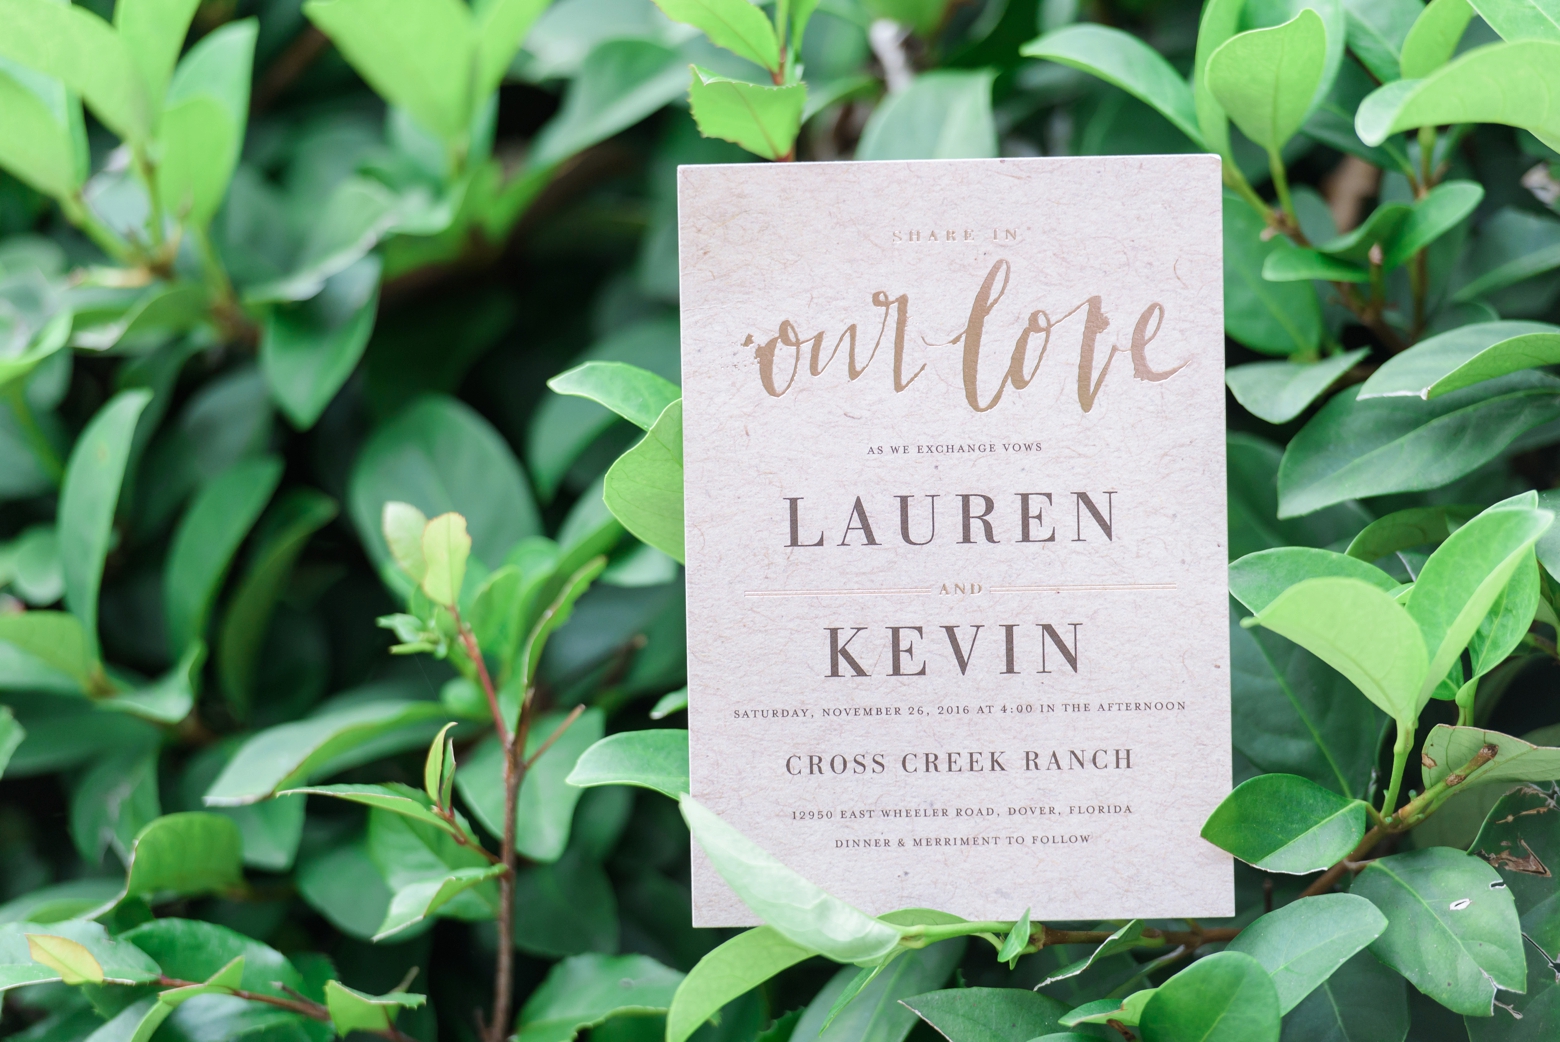 Wedding invitation surrounded by greenery